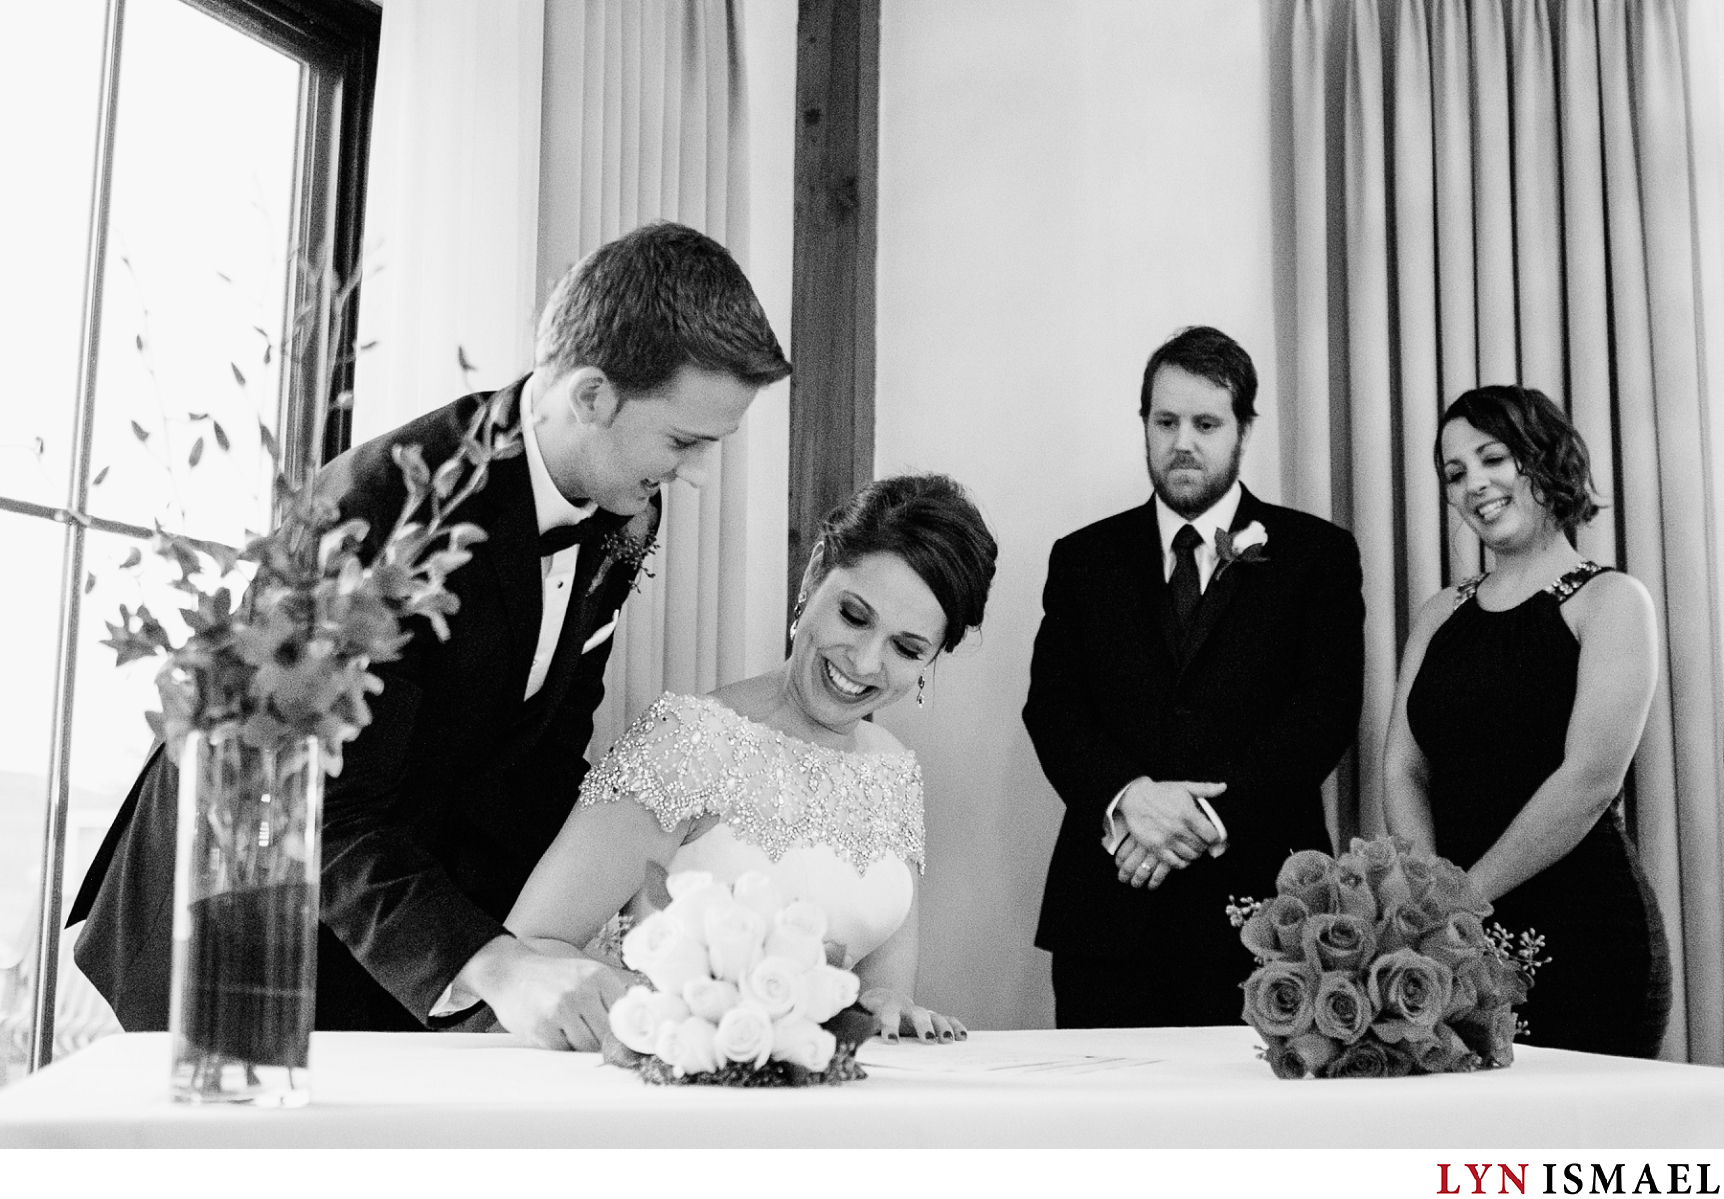 The bride and groom signs their wedding contract while their witnesses watch on.